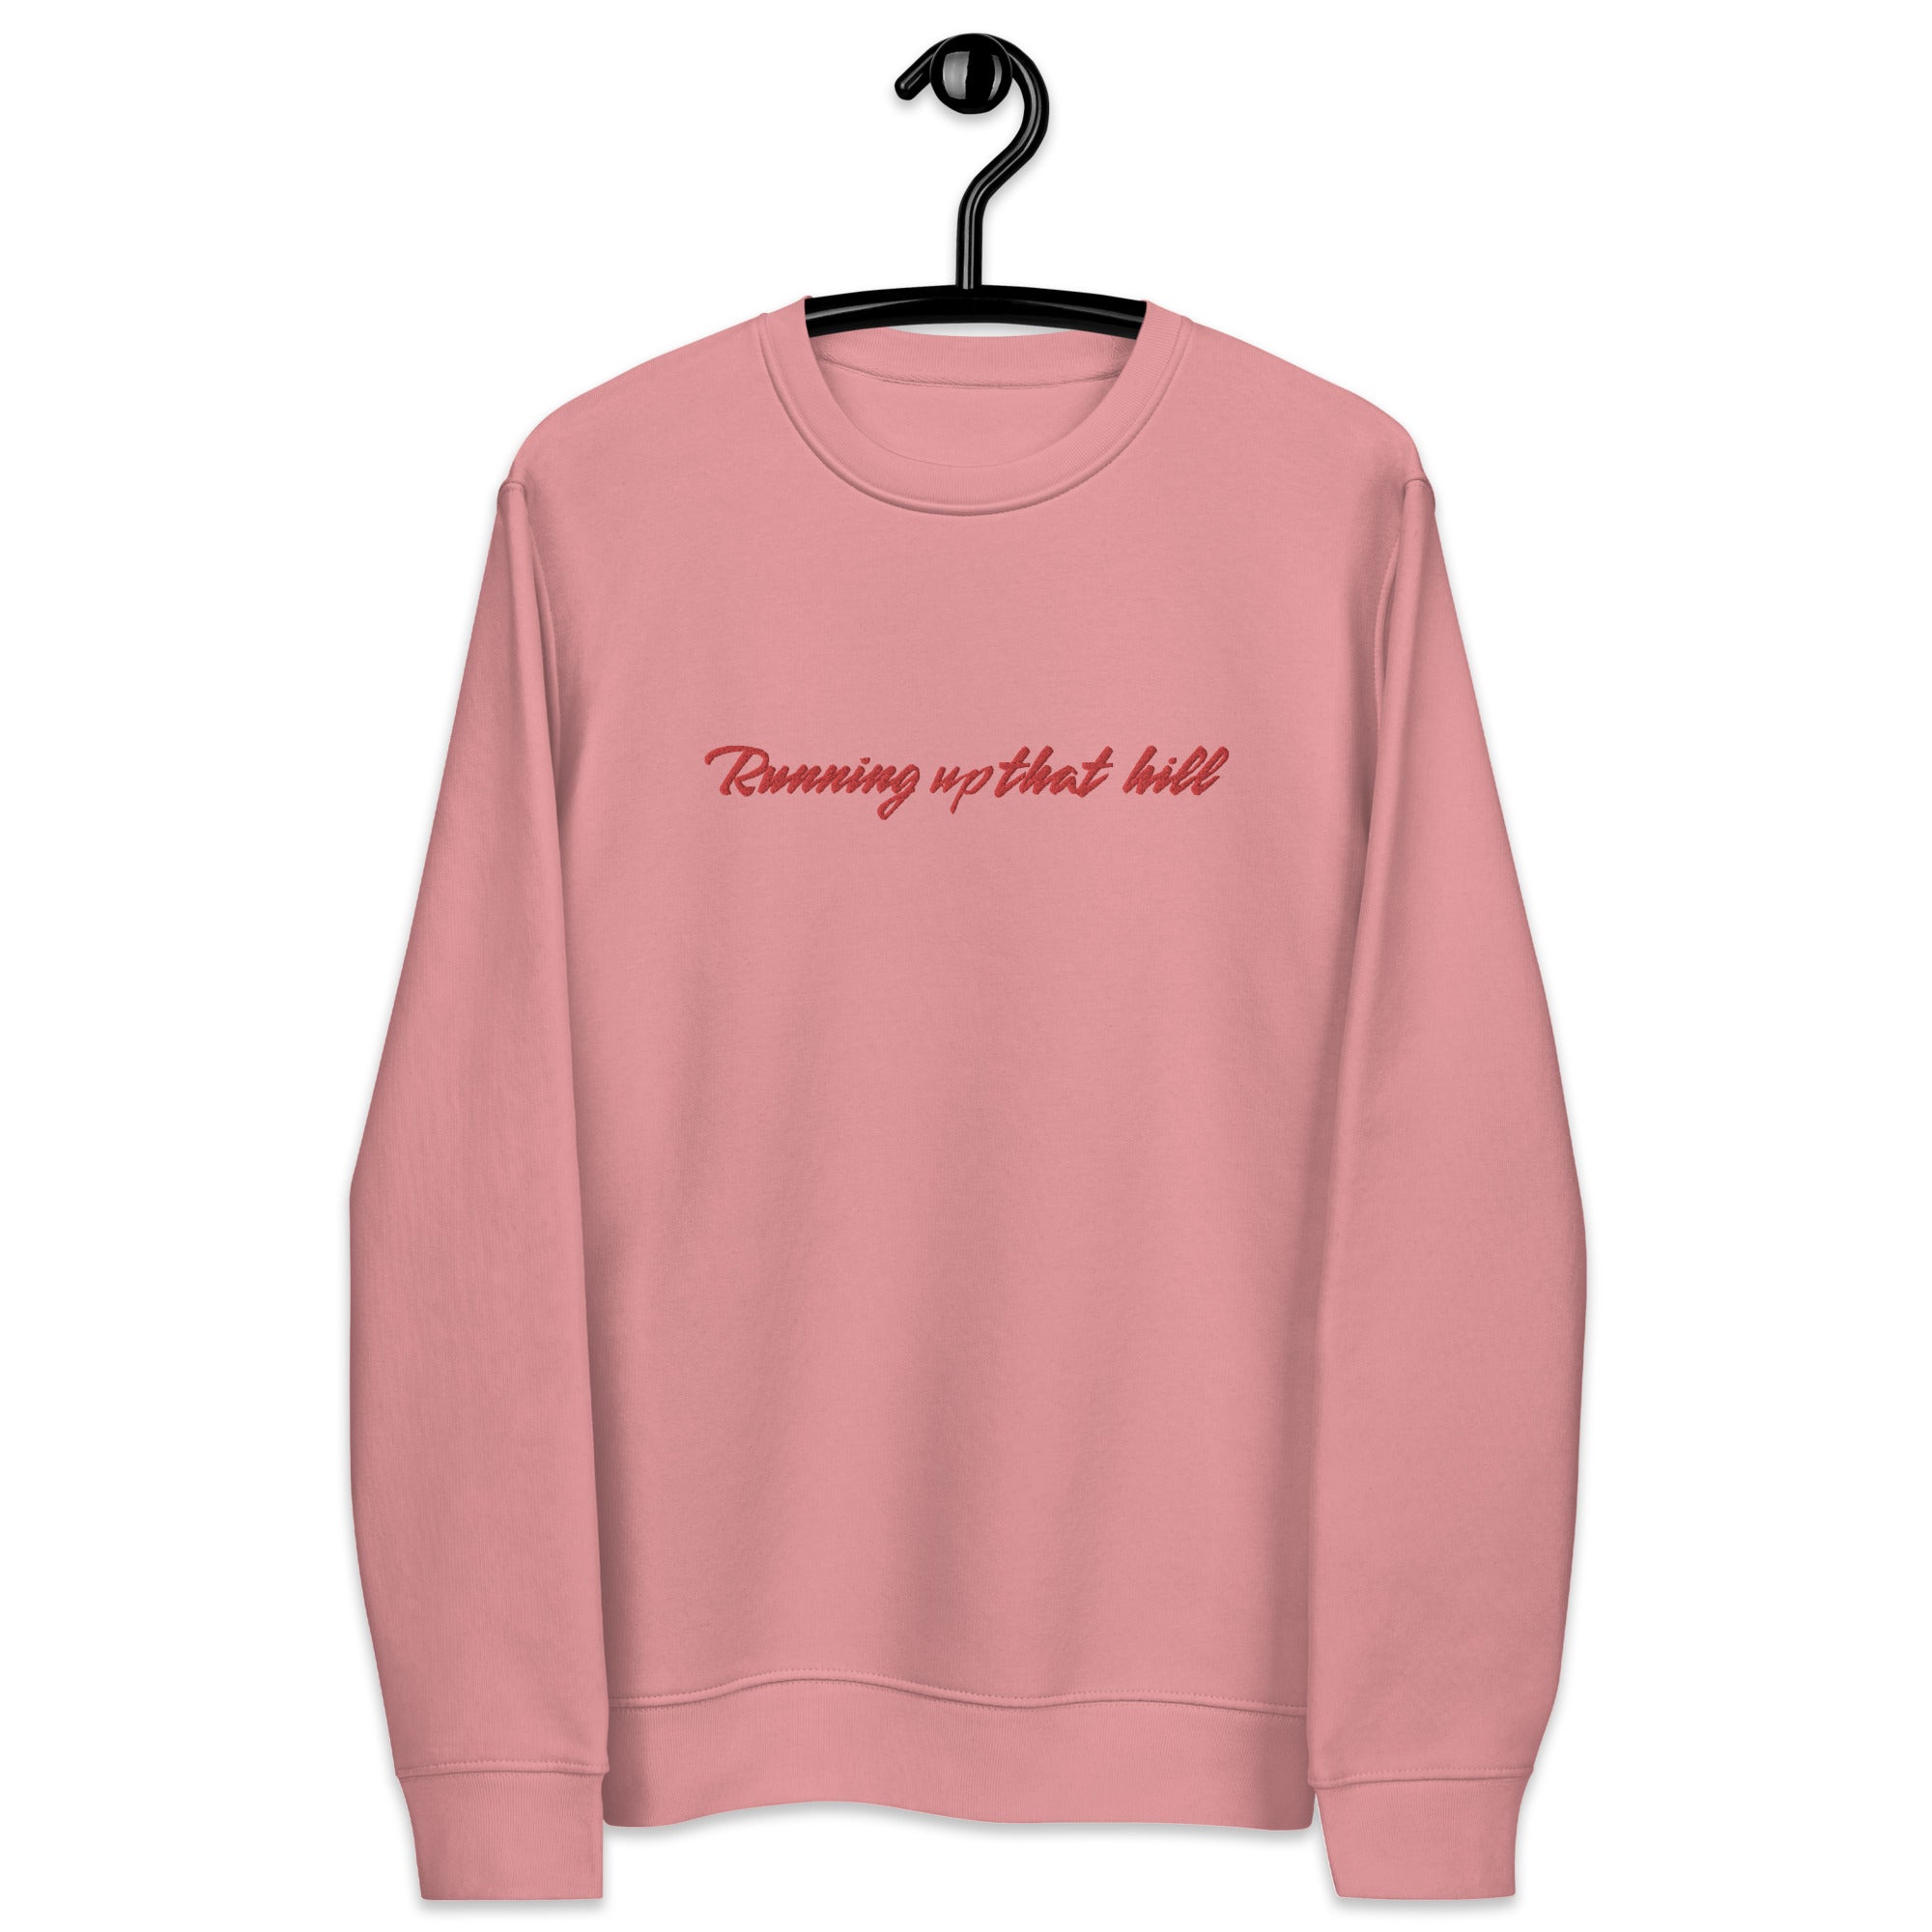 RUNNING UP THAT HILL Embroidered Unisex Organic Sweatshirt - red text